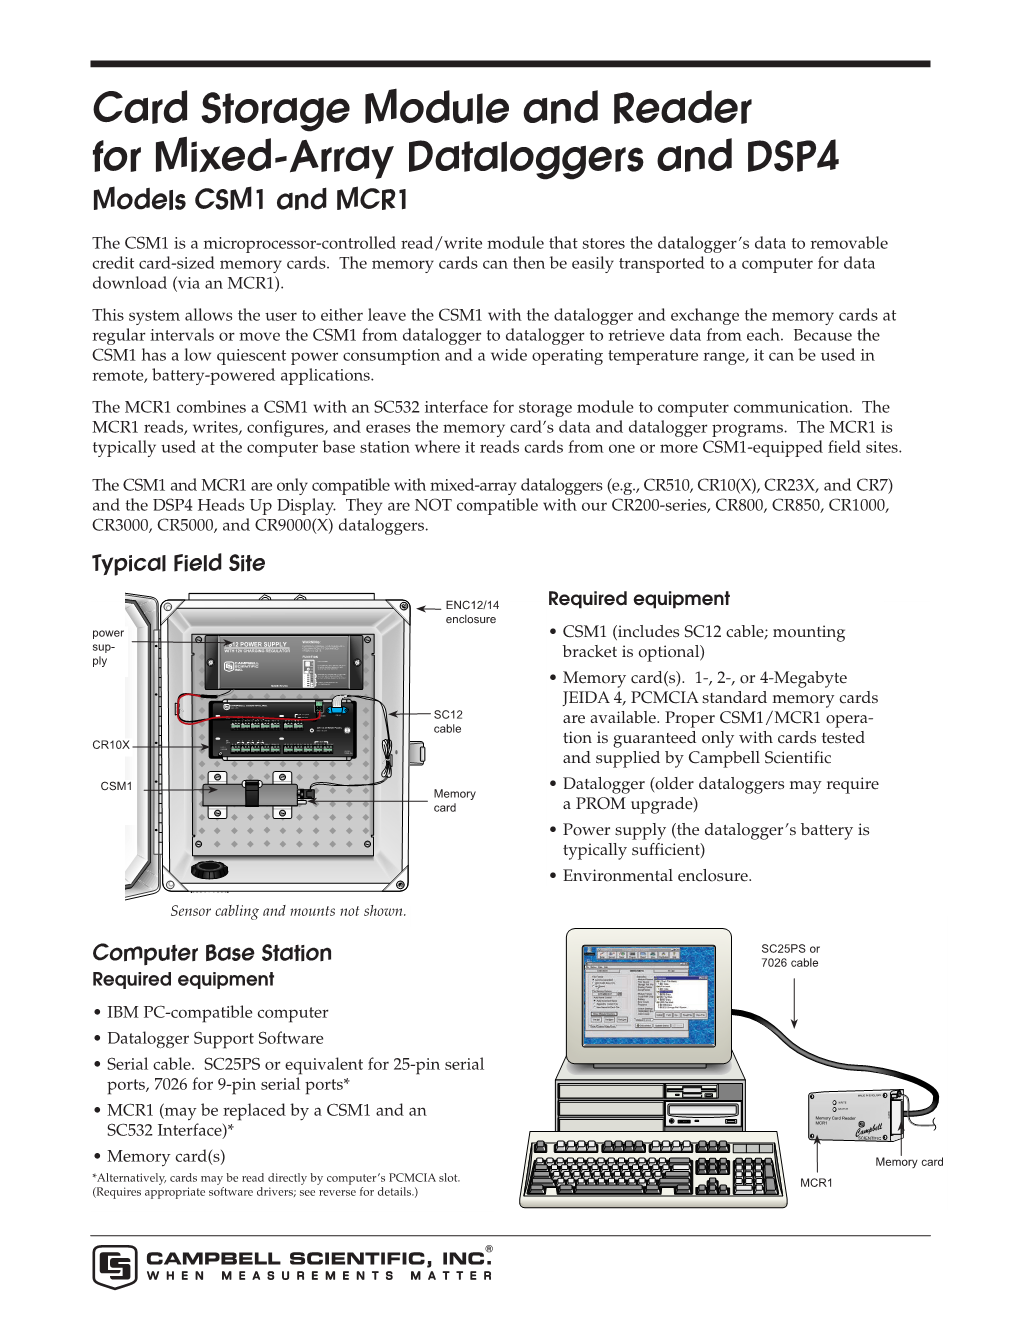 Card Storage Module and Reader for Mixed-Array Dataloggers and DSP4 Models CSM1 and MCR1